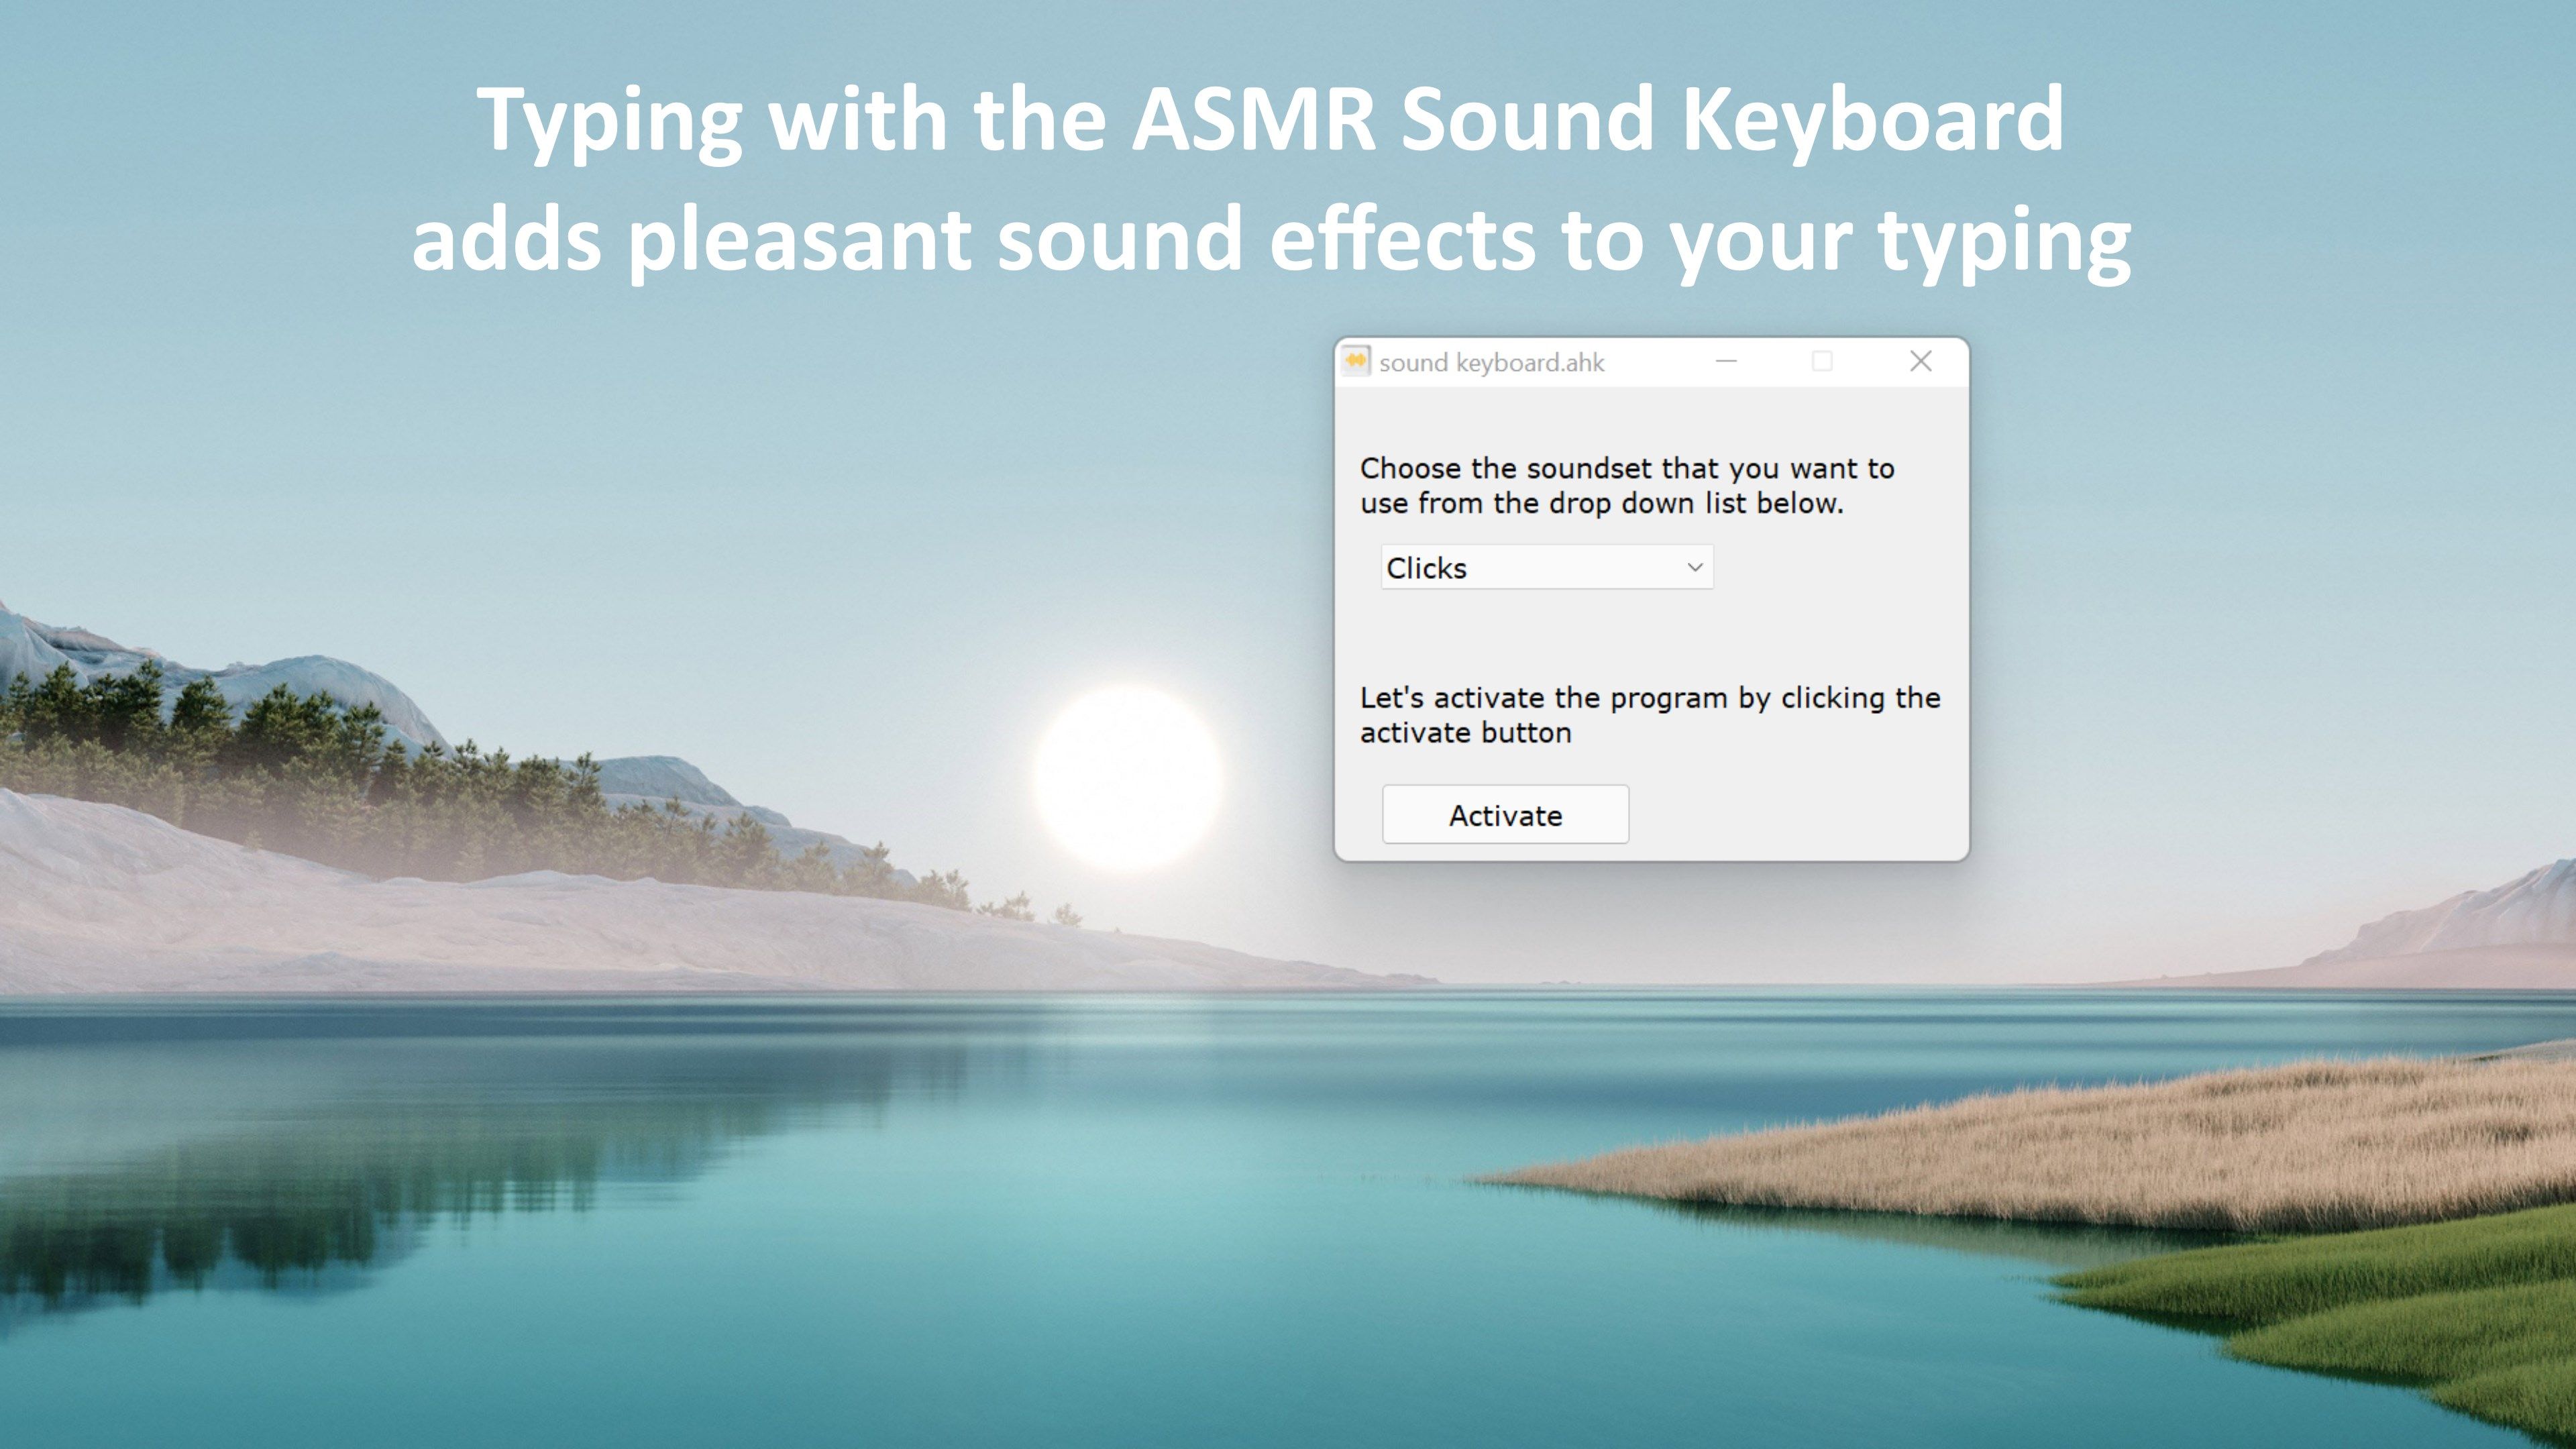 A simple clean Ui for the ASMR Sound Keyboard - add typing sounds to your key presses on the keyboard to make it more fun